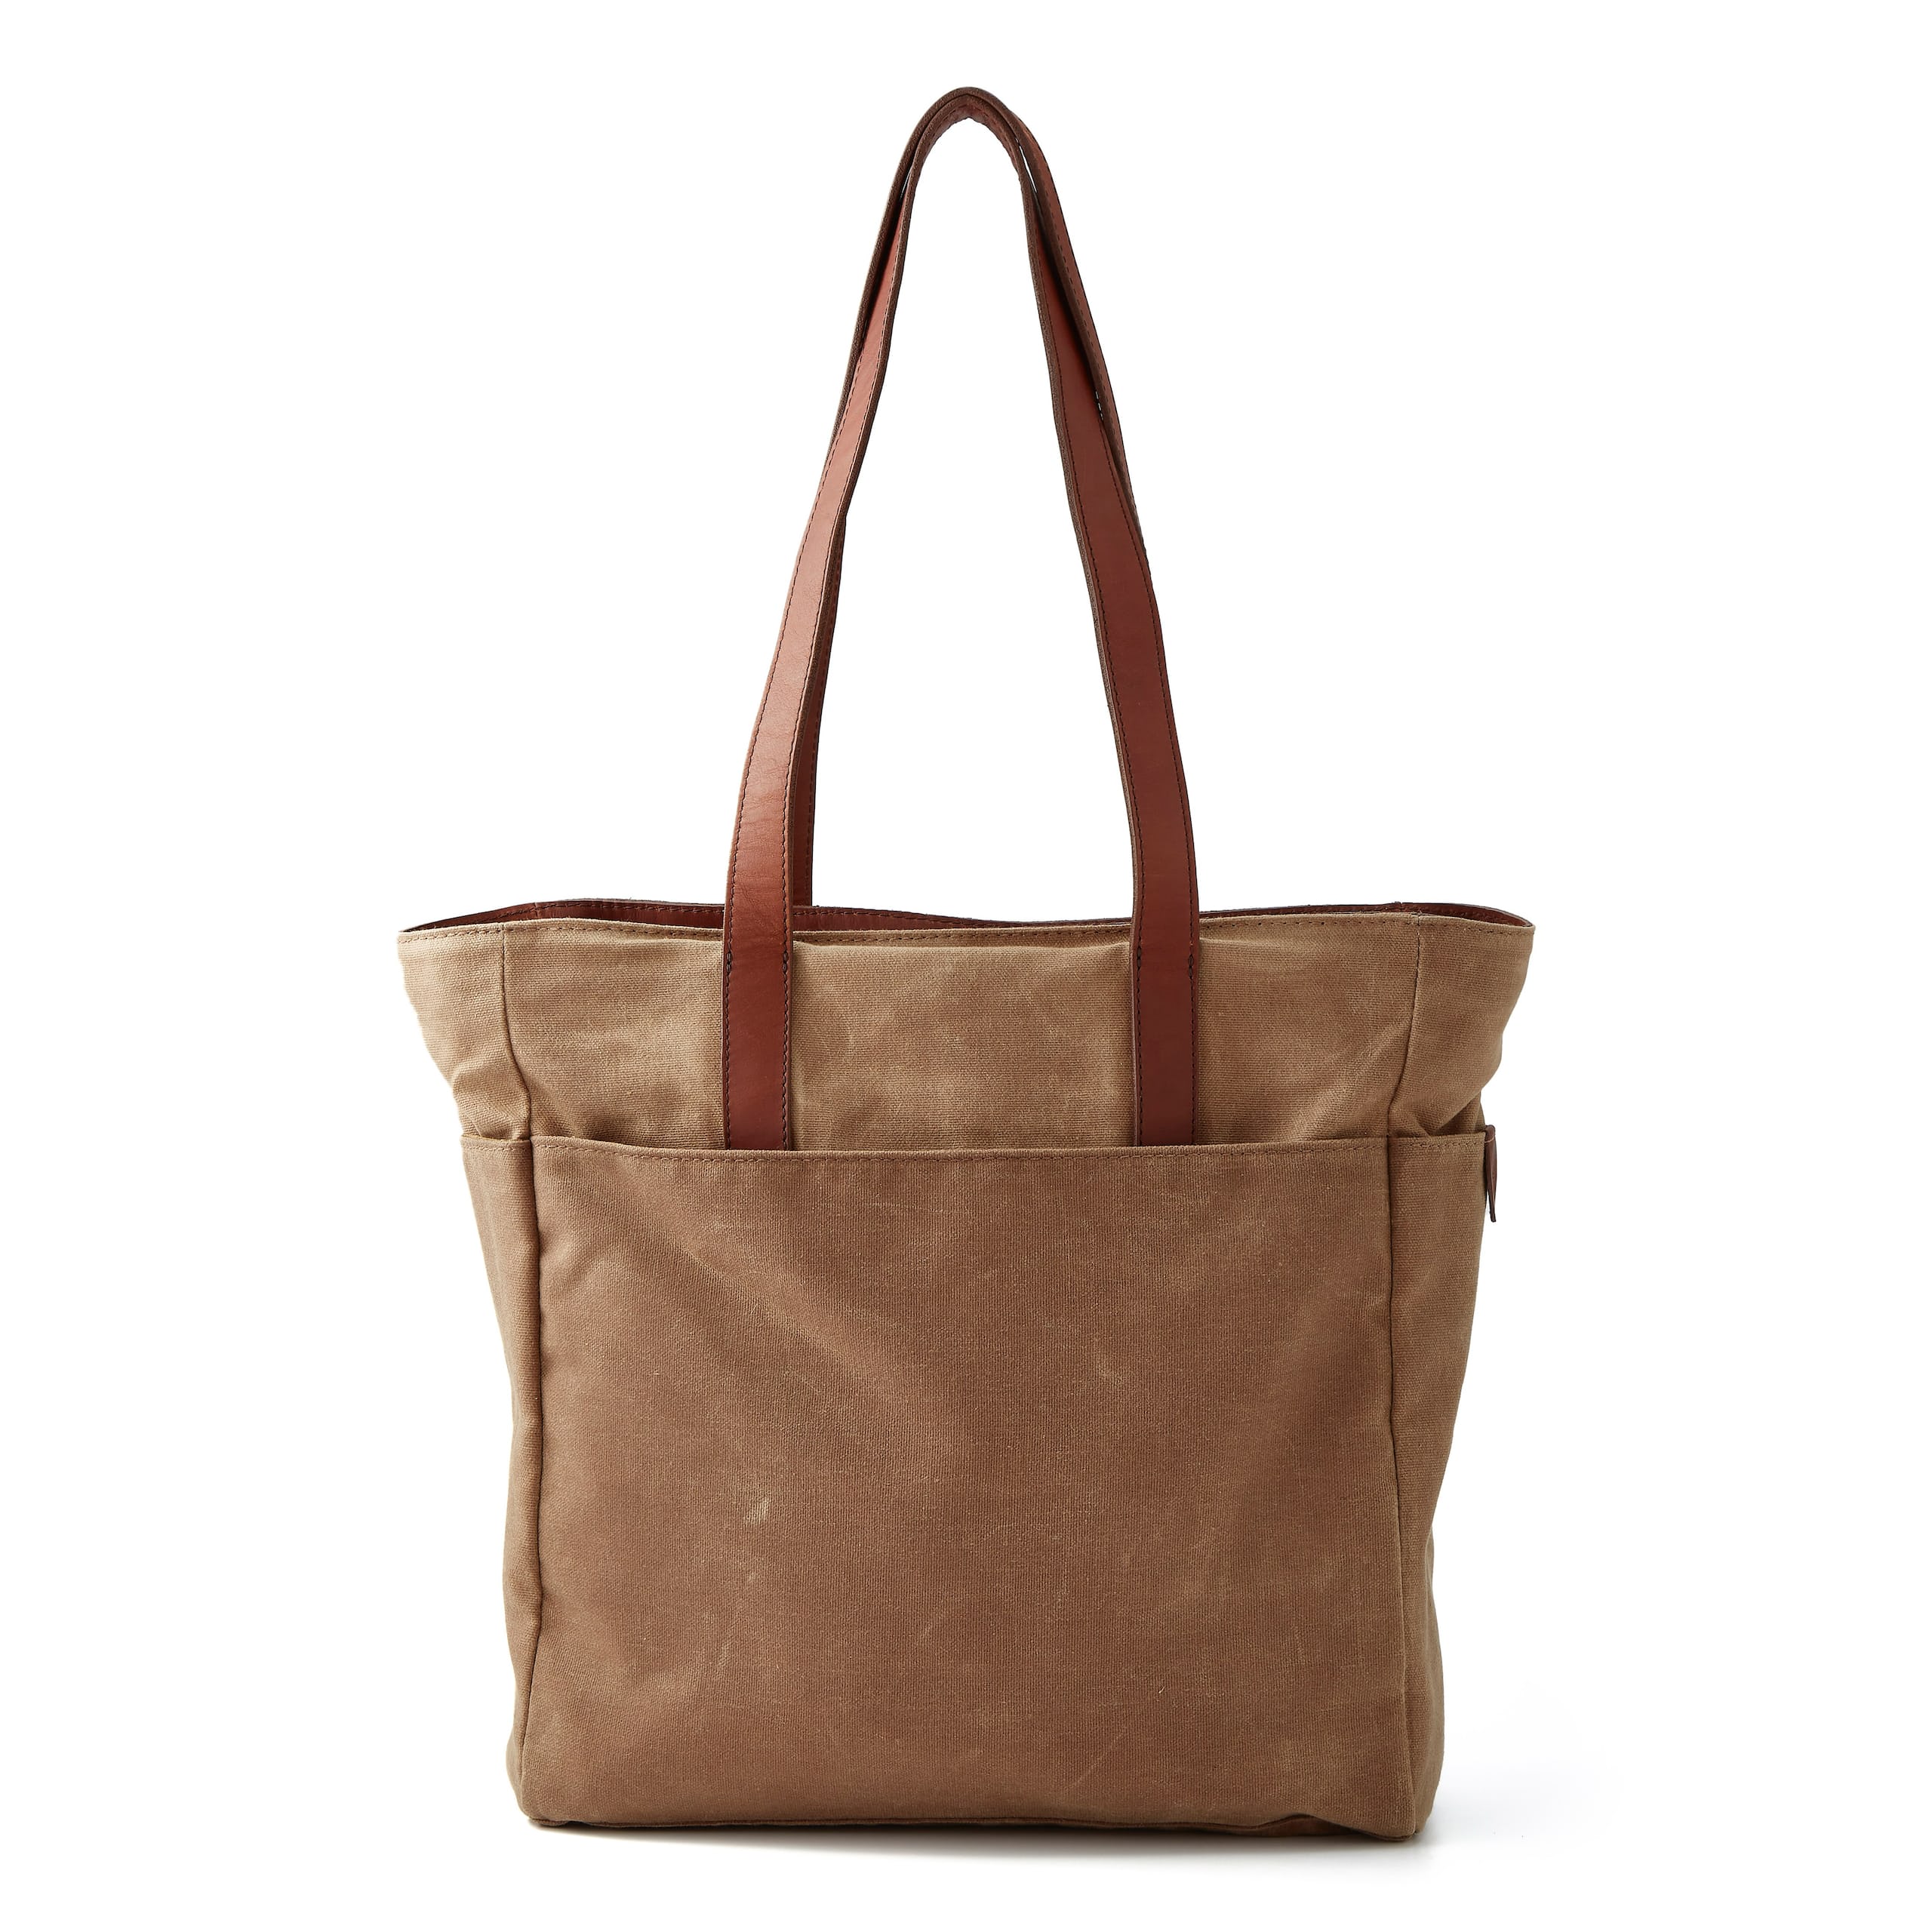 Waxed Canvas Tote in Tan